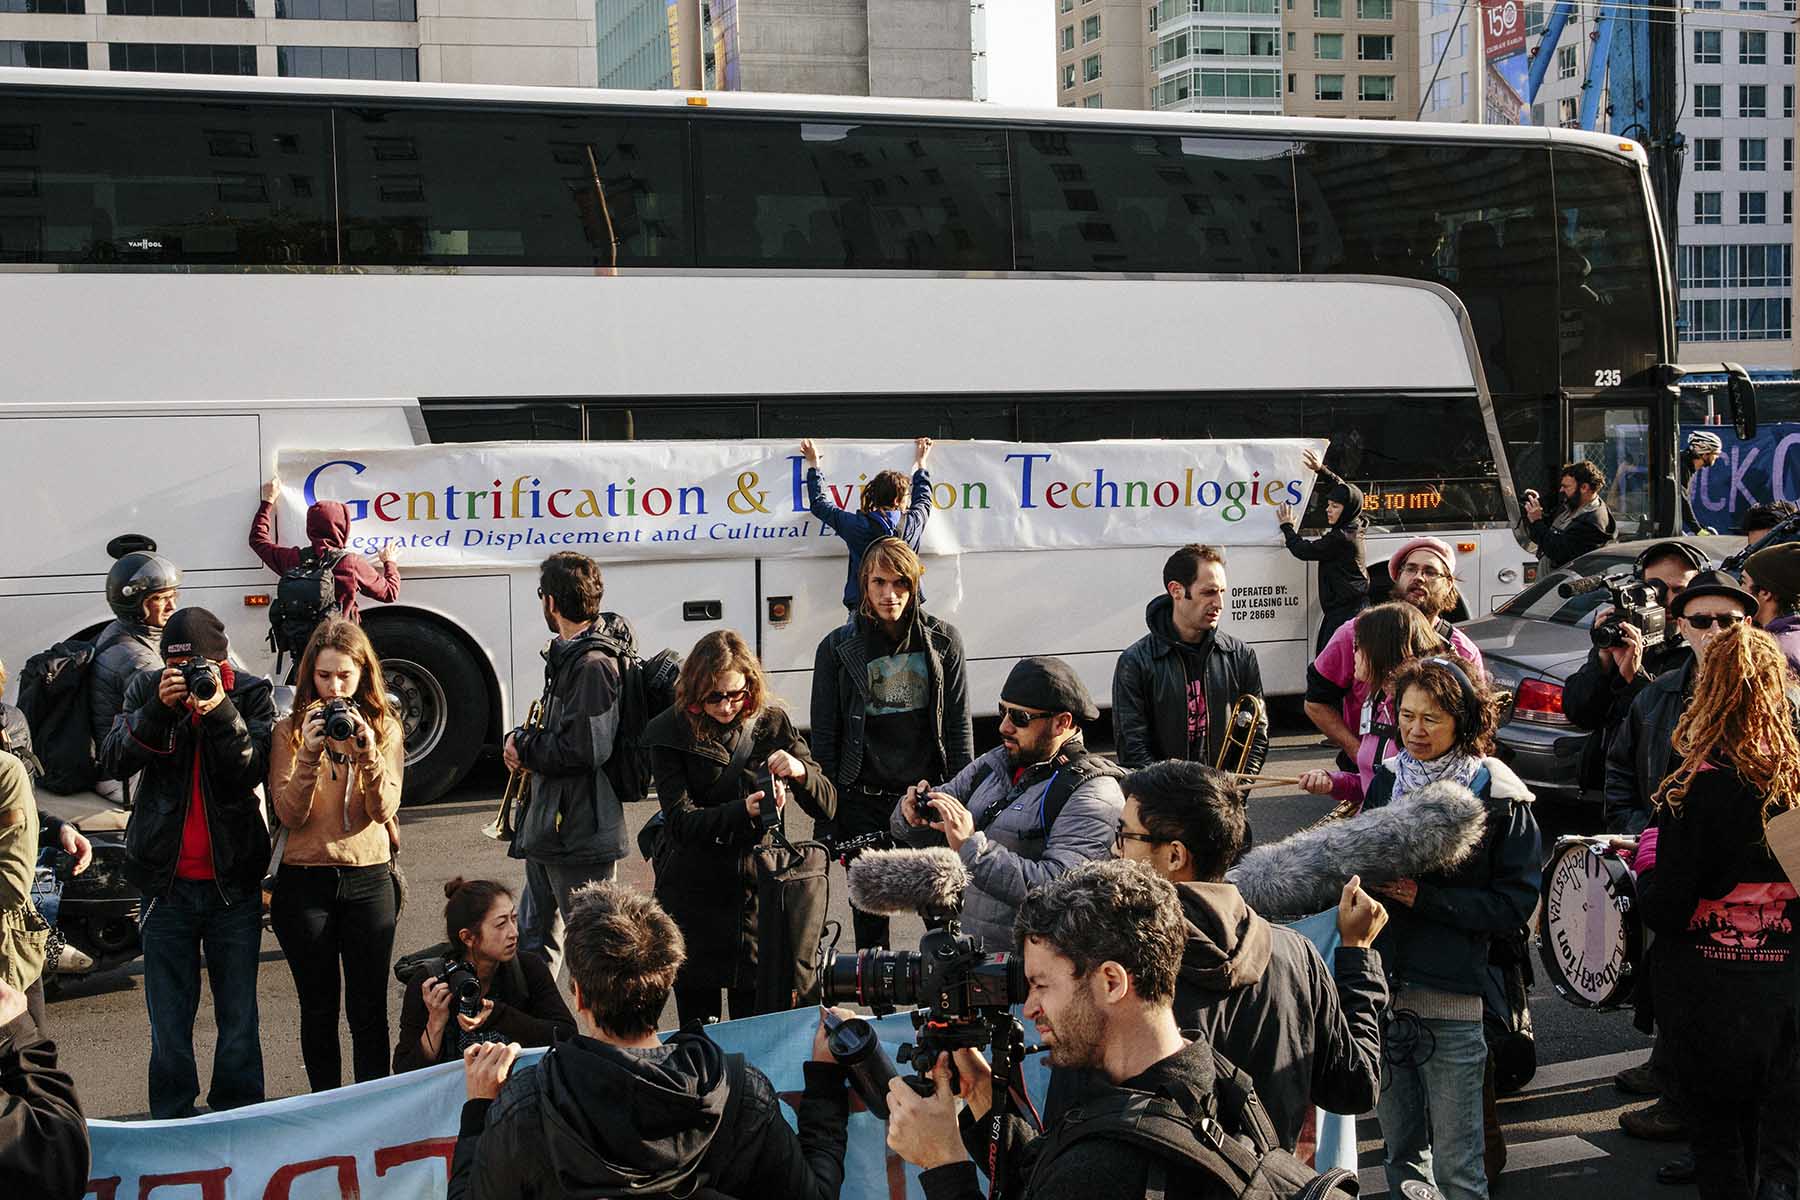 Protesters who blame tech wealth for San Francisco’s soaring housing costs blockade a private shuttle filled with Google employees. (Jake Stangel for TIME)